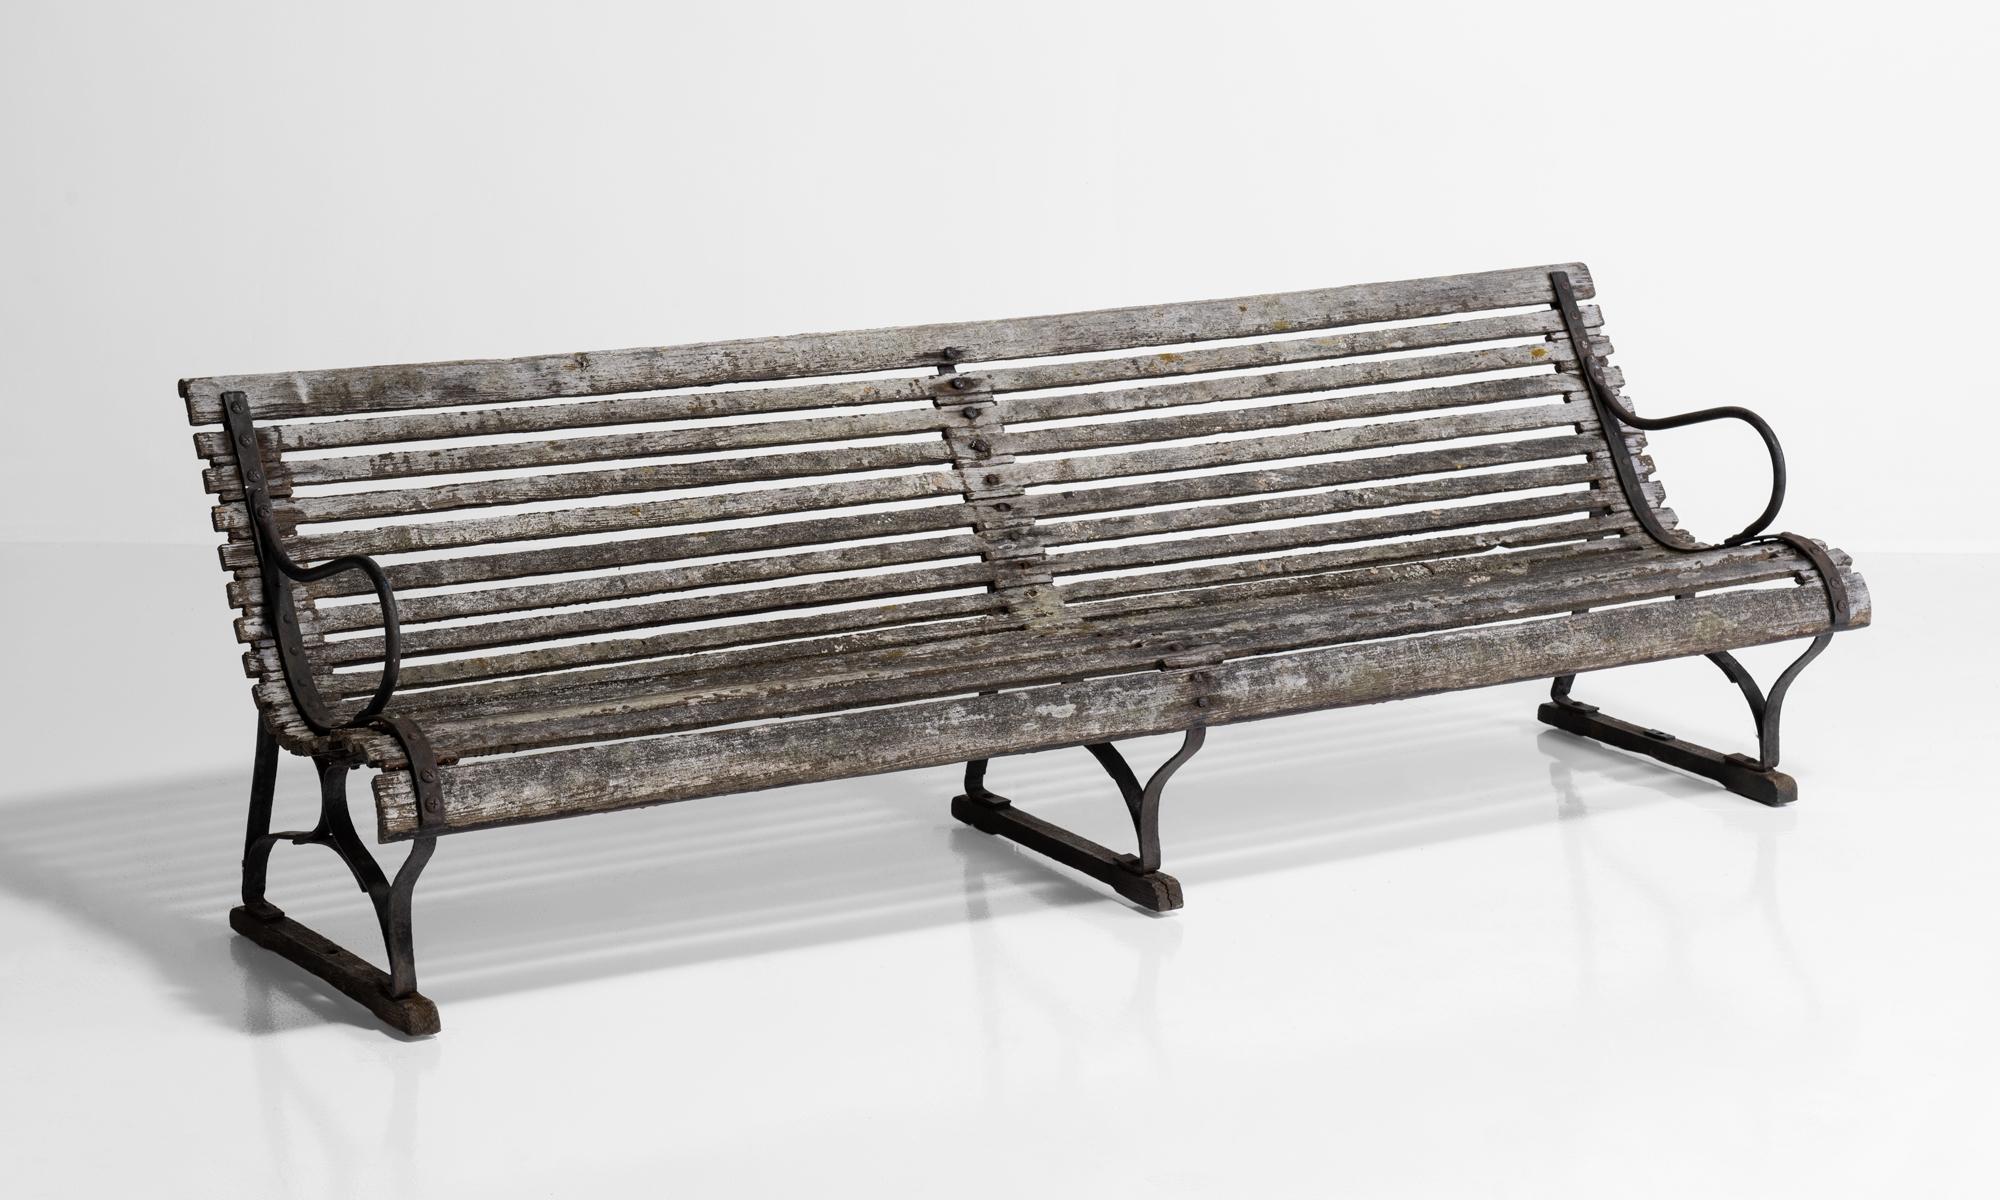 Edwardian ships steamer bench, England circa 1900.

Teak and wrought iron bench, originally made and used on a steamer ship.   
  